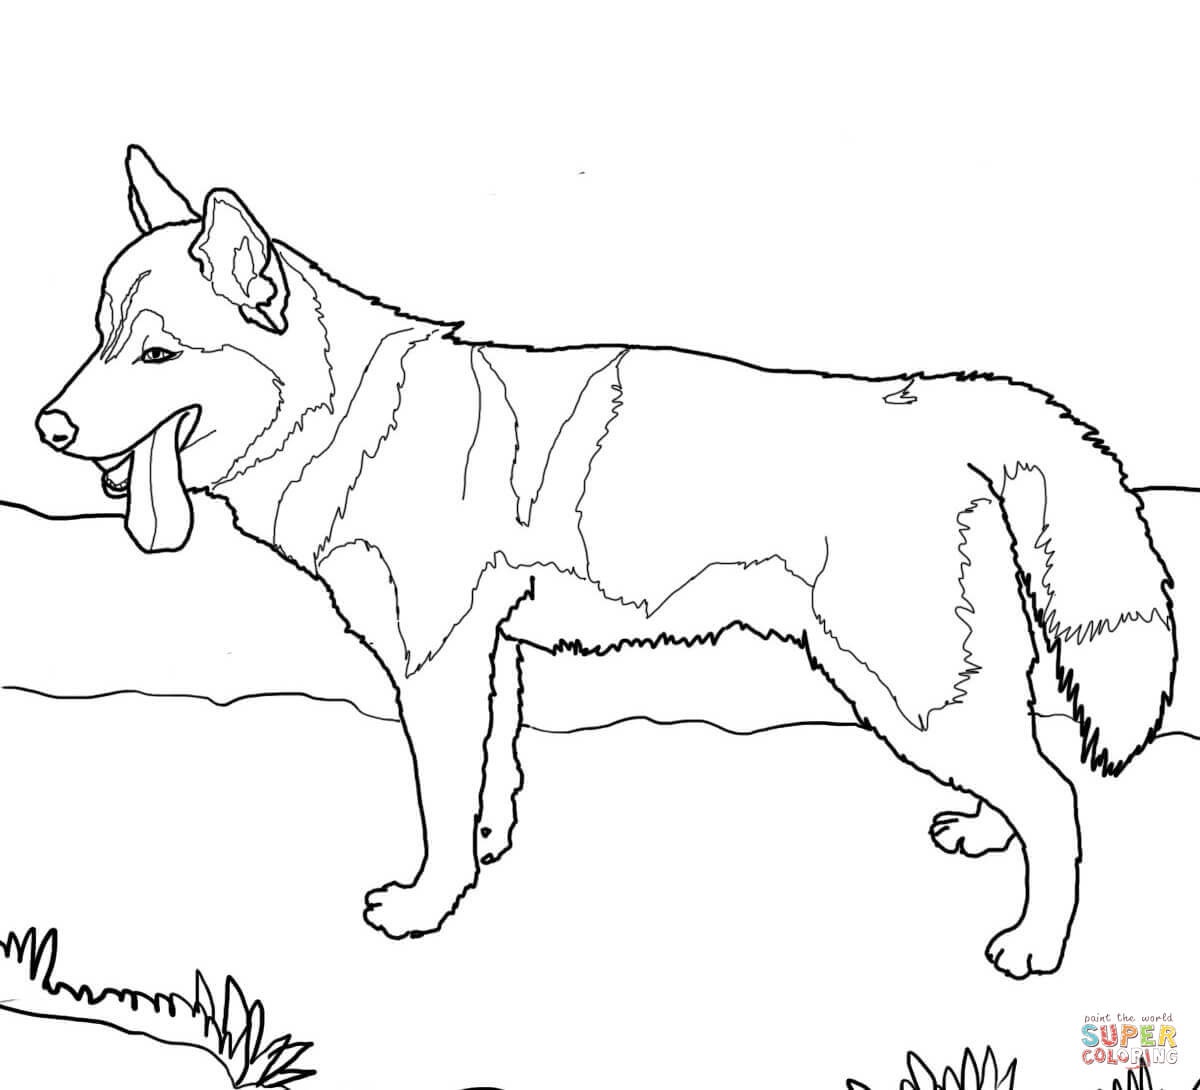 Coloring Pages Of Dogs - K 9 Police Dog Coloring Page Free Printable - Free Printable Dog Coloring Pages